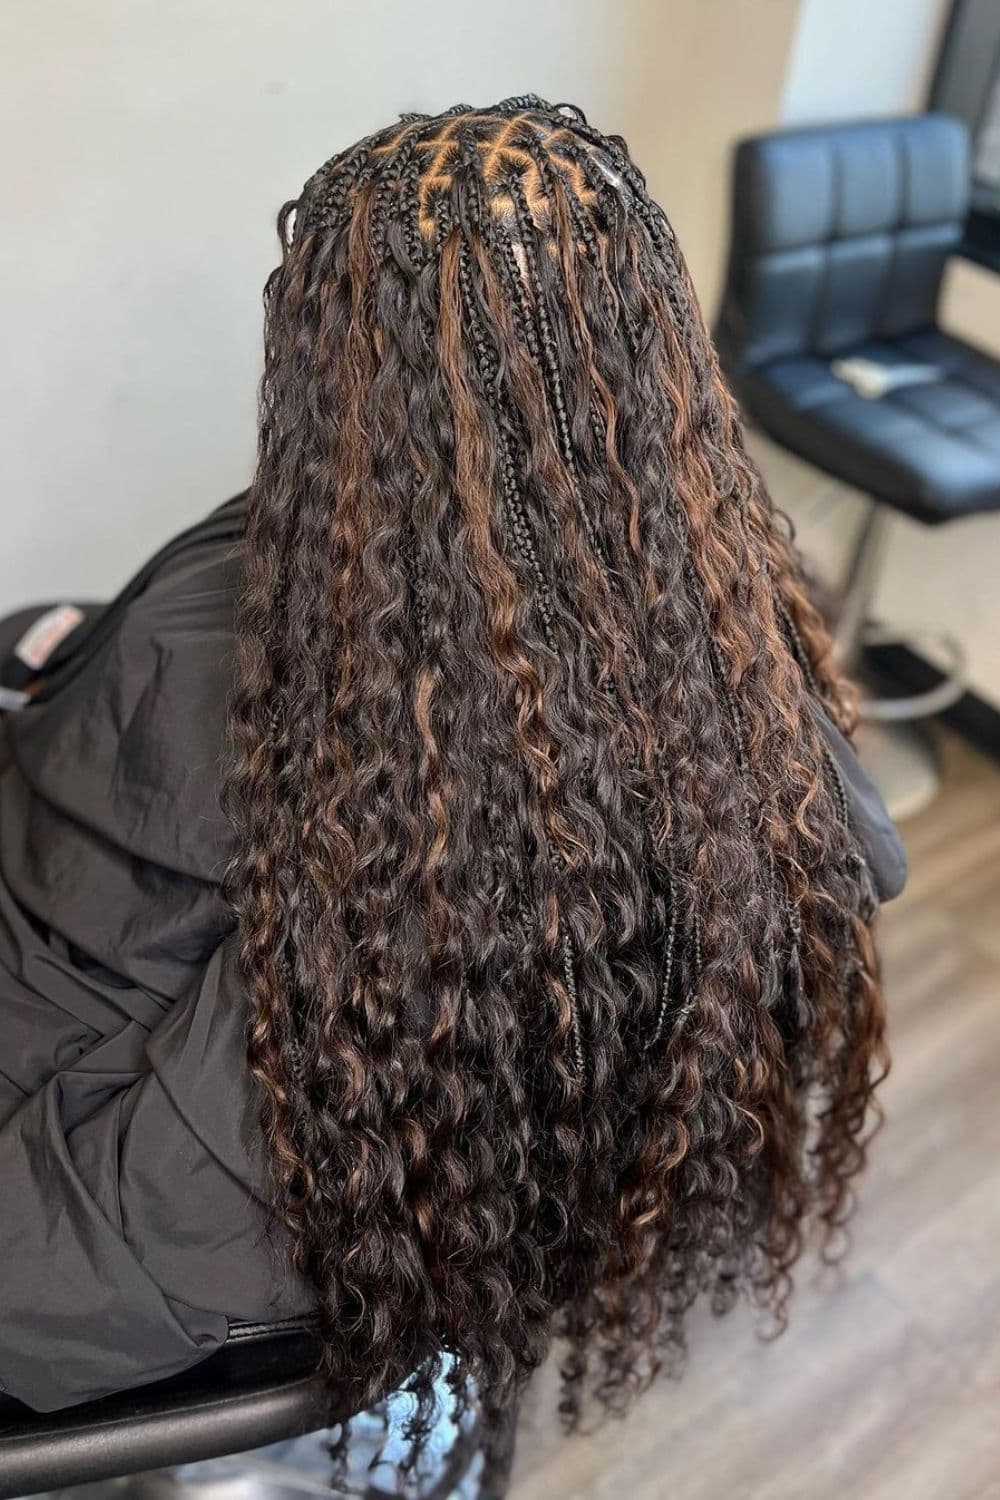 A woman's hair with black and brown goddess braids.